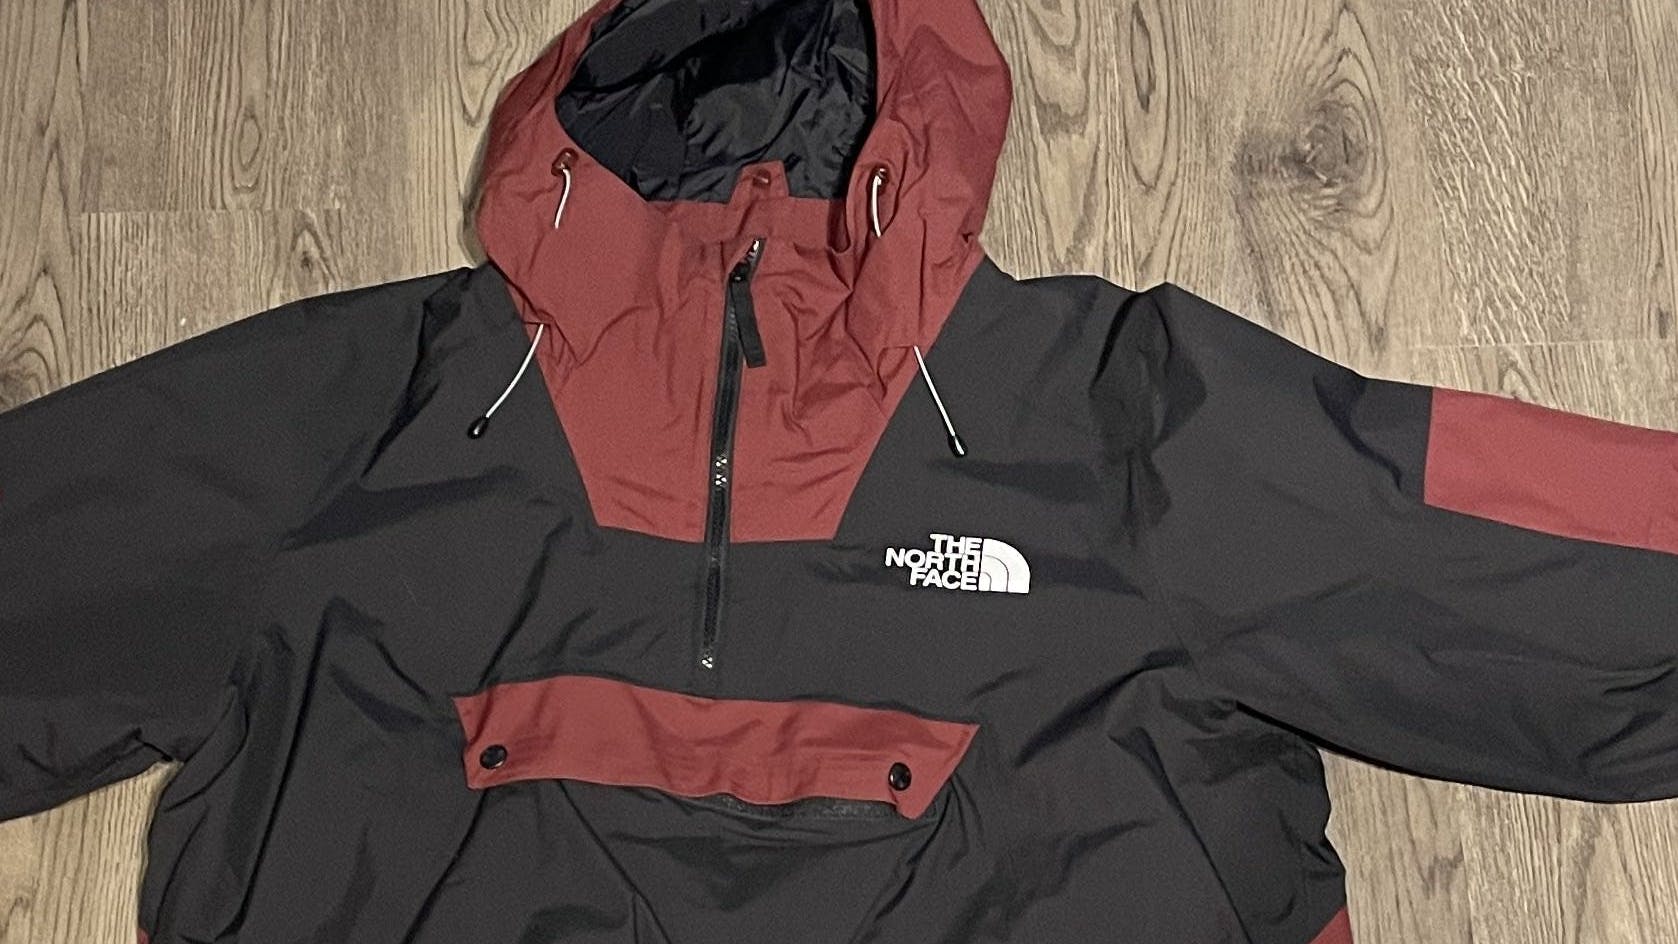 The The North Face Men's Silvani Anorak Shell Jacket.